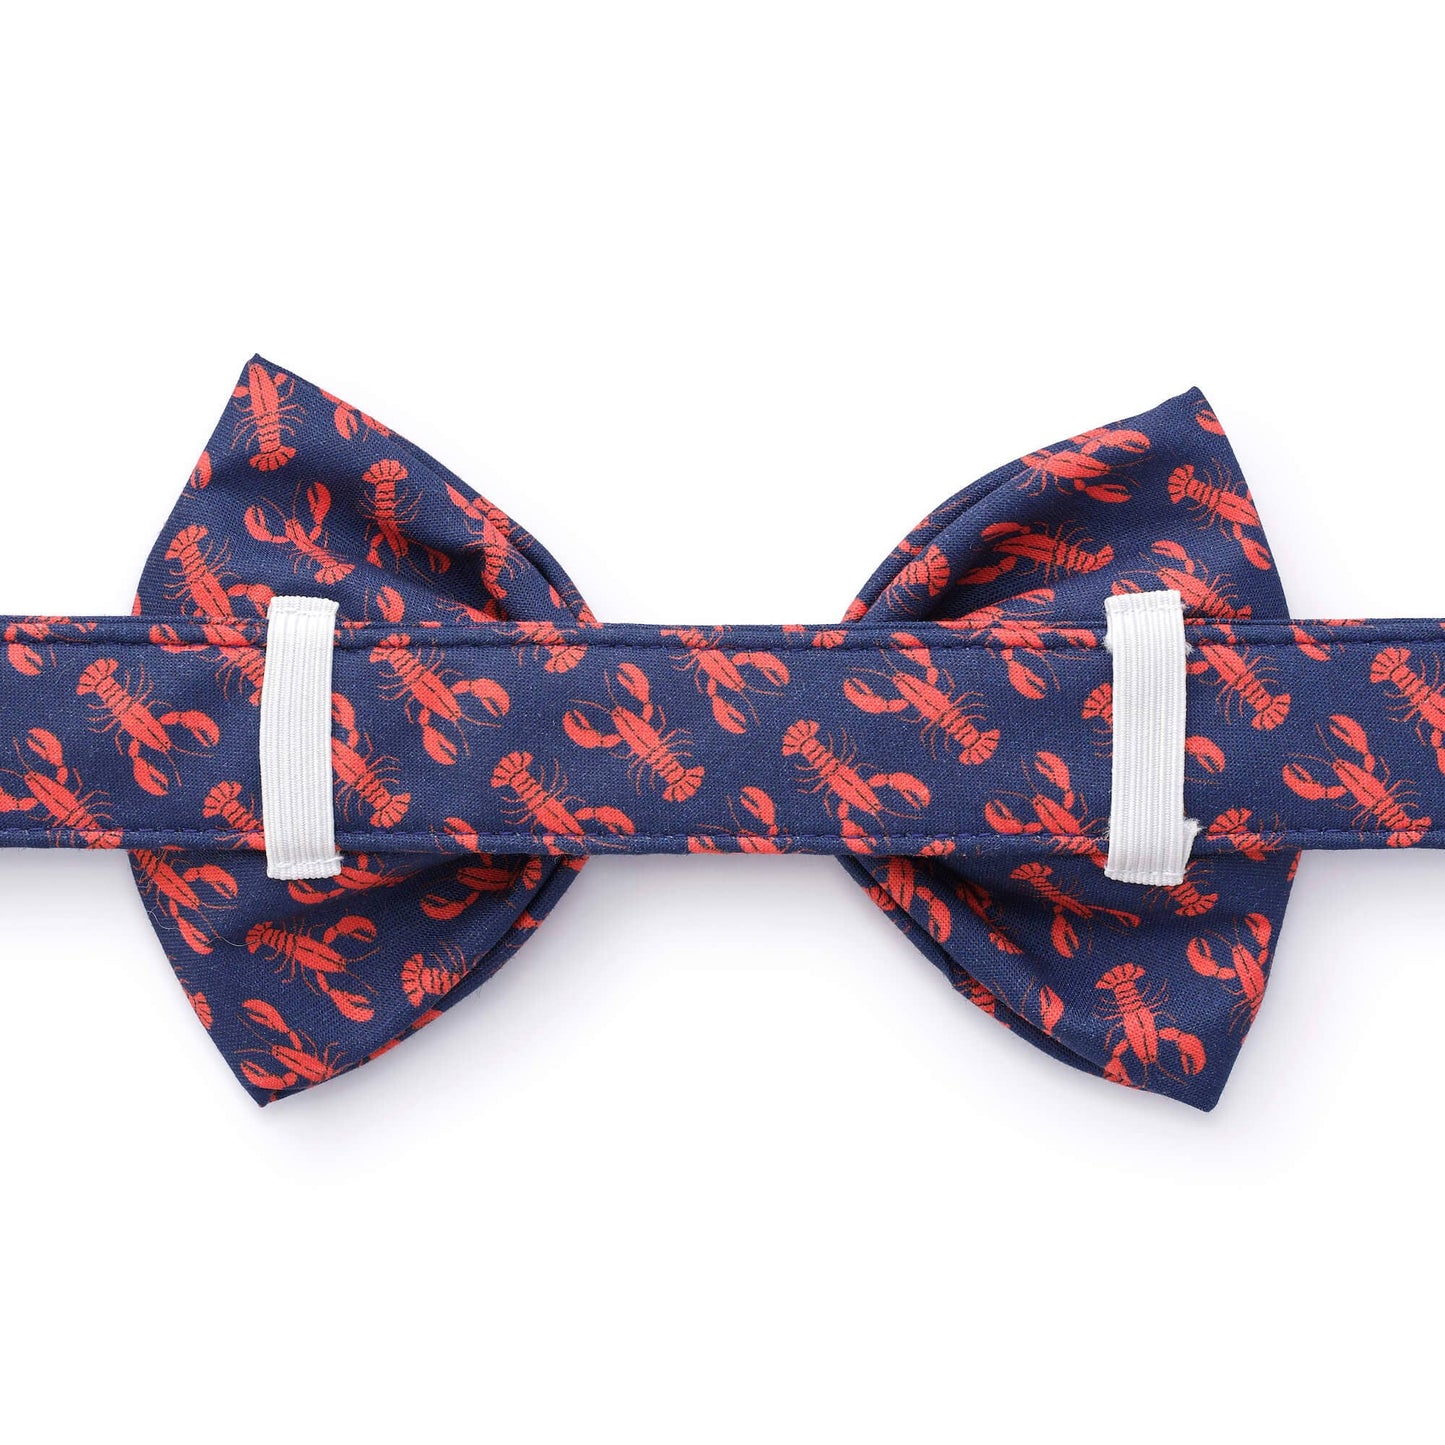 Catch of the Day Navy Dog Bow Tie